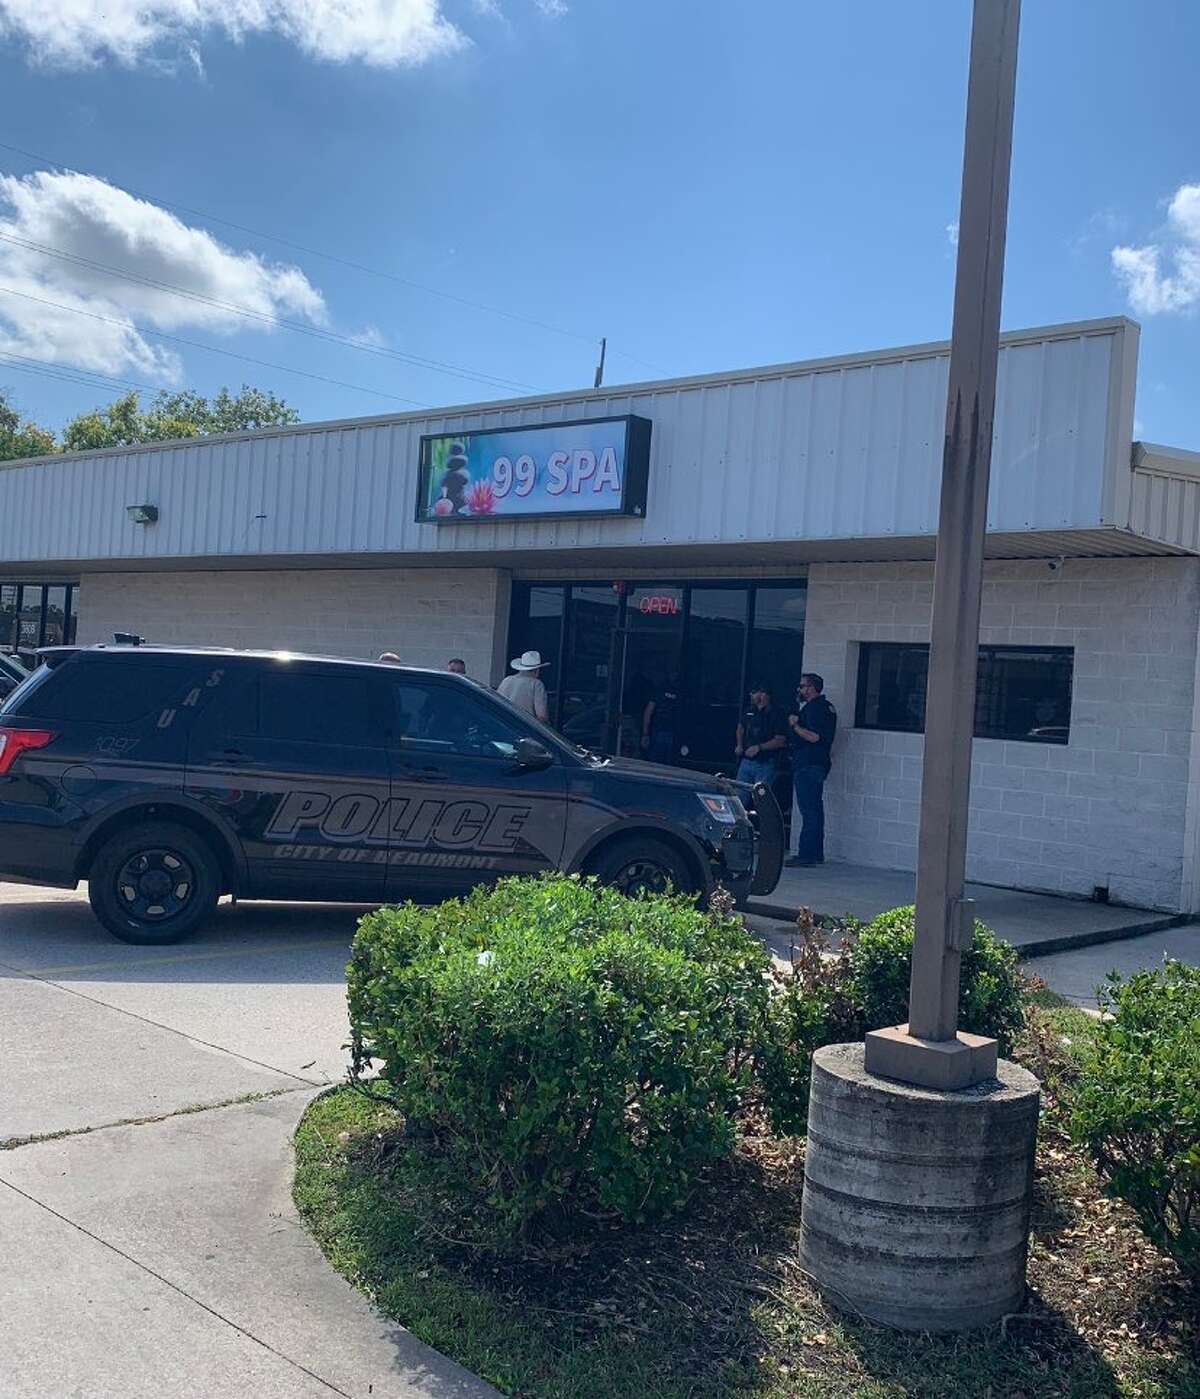 The Beaumont Police Department said it was assisted by Beaumont Code Enforcement, Beaumont Fire Marshal's Office, Homeland Security and an Anti-Trafficking Specialist with Texas Department of Licensing & Regulation when it conducted a business compliance check and a human trafficking investigation shortly after noon on Thursday at 99 SPA, which is located at 360 South MLK Parkway.